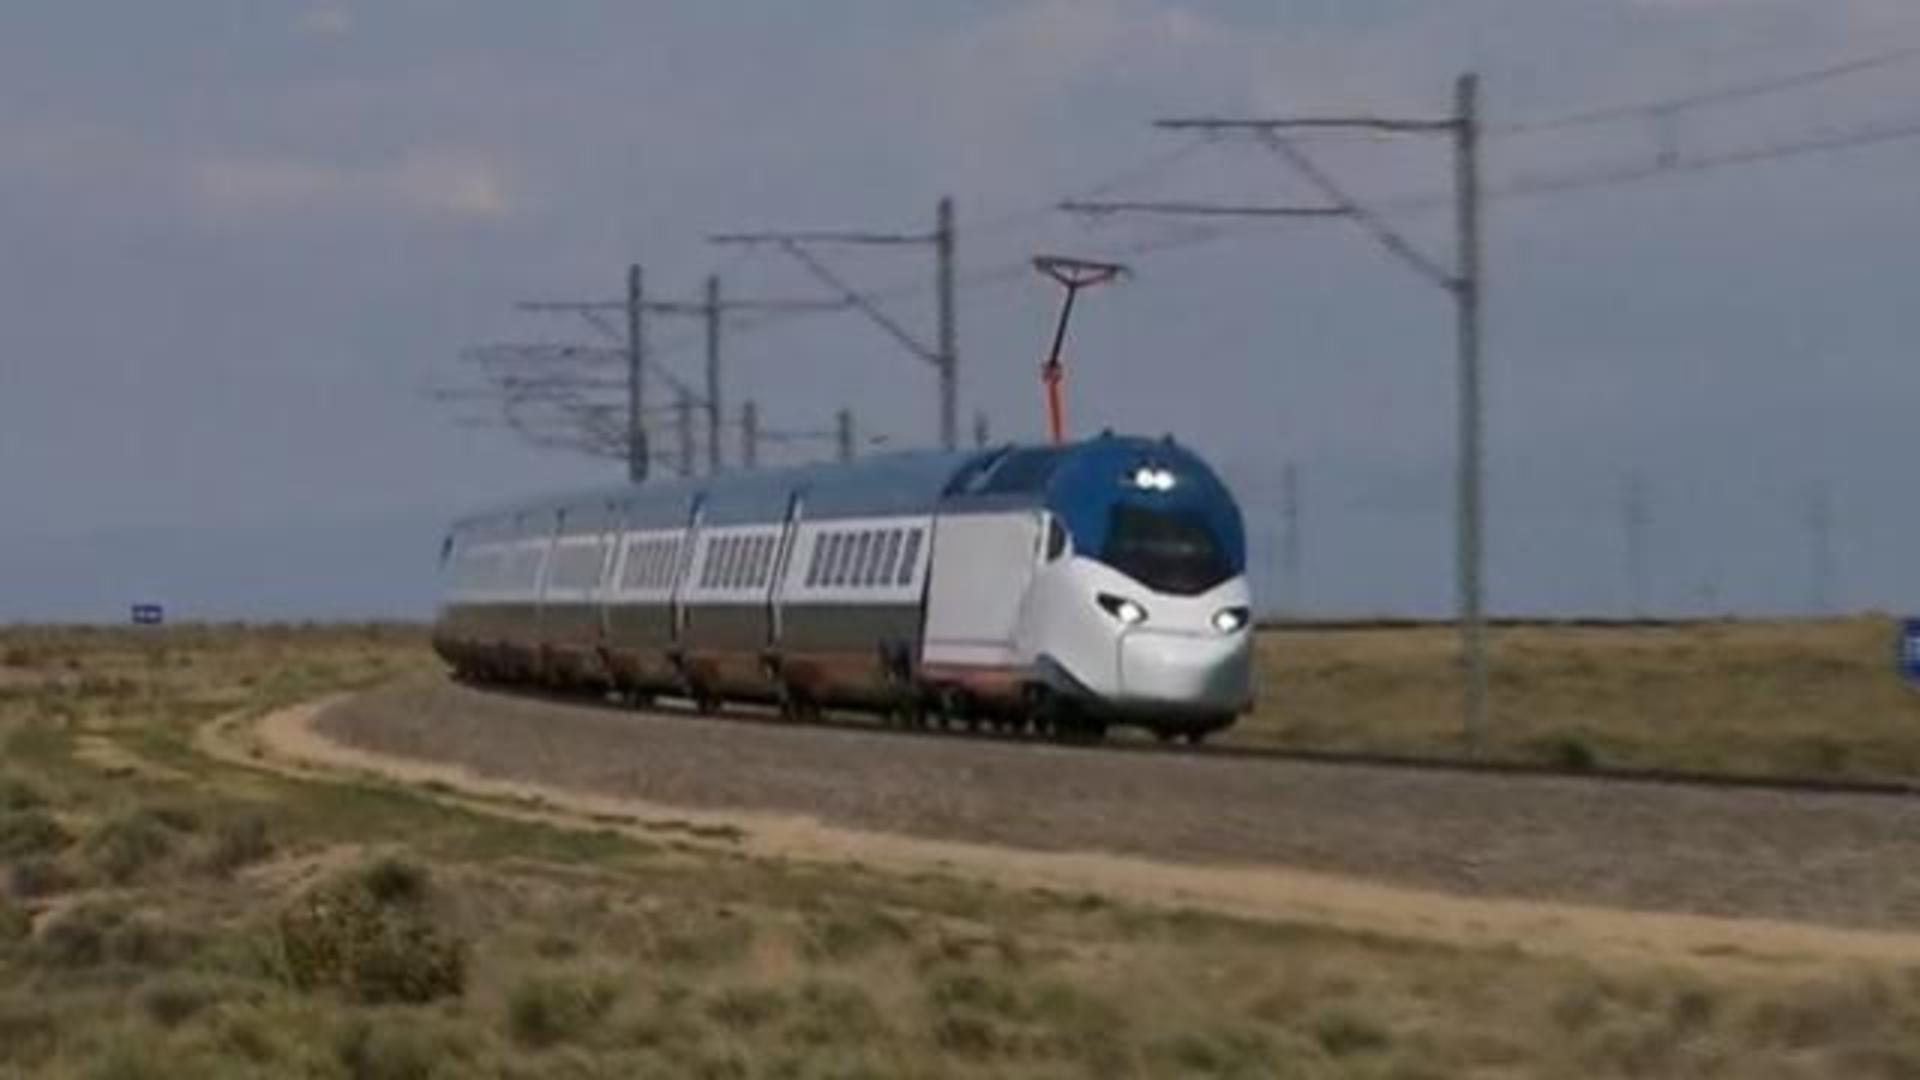 Avelia high-speed trains: The best way to travel fast